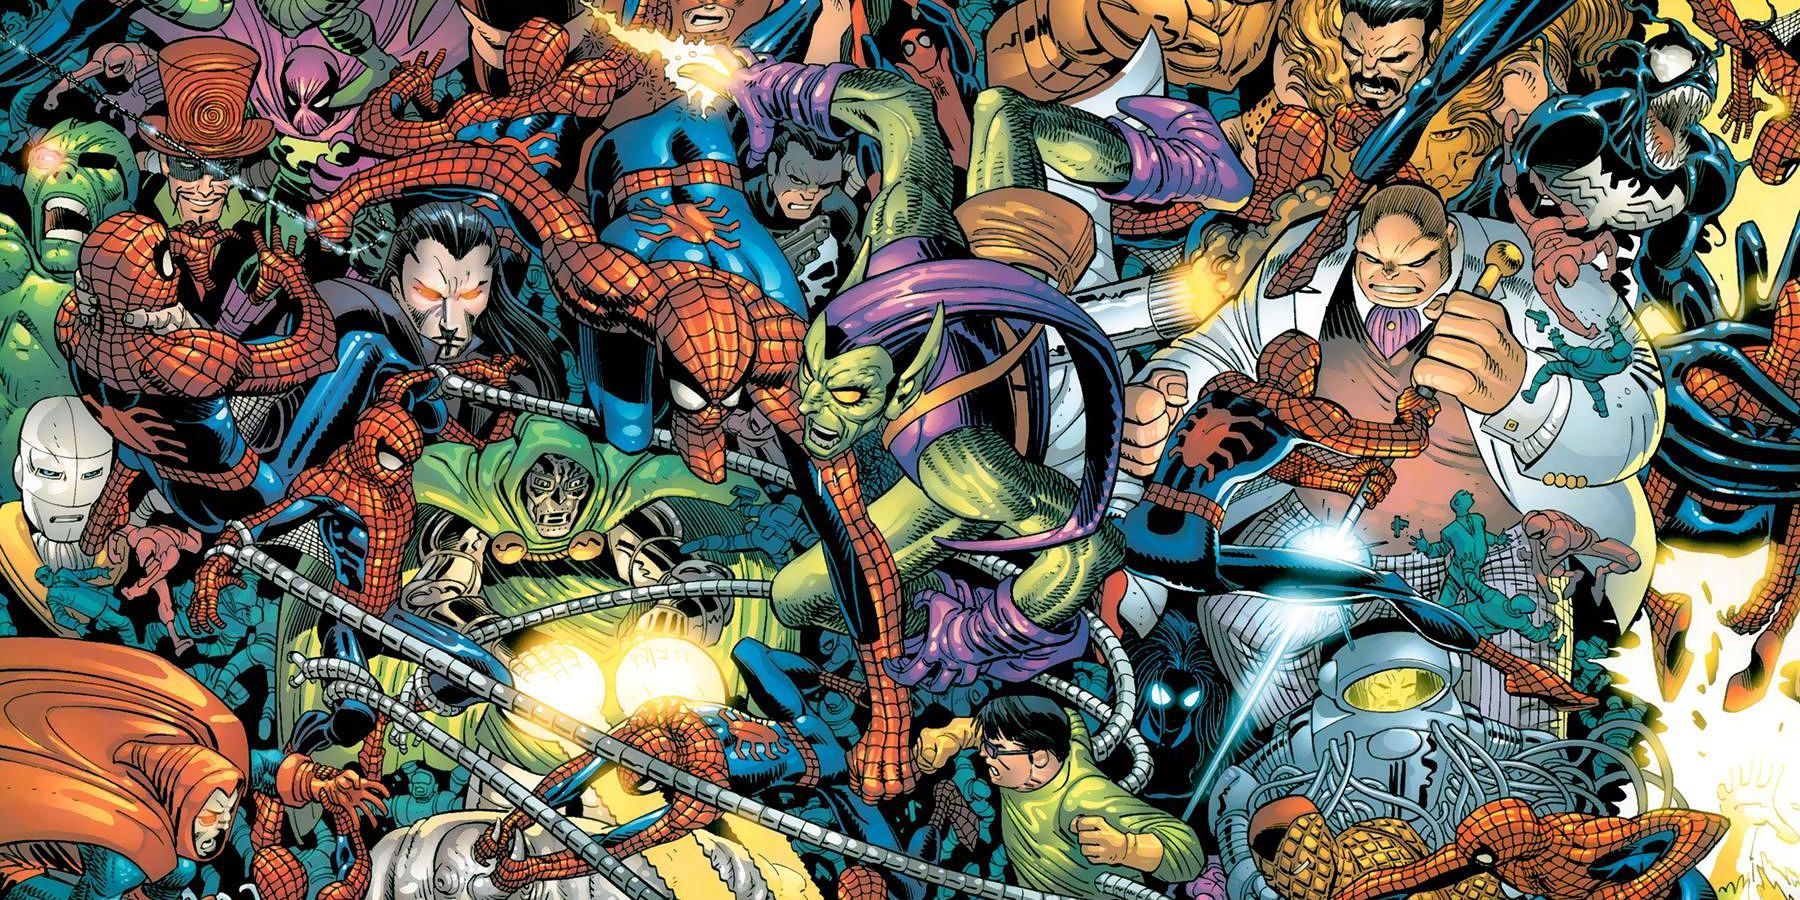 Spider-Man and his many villains